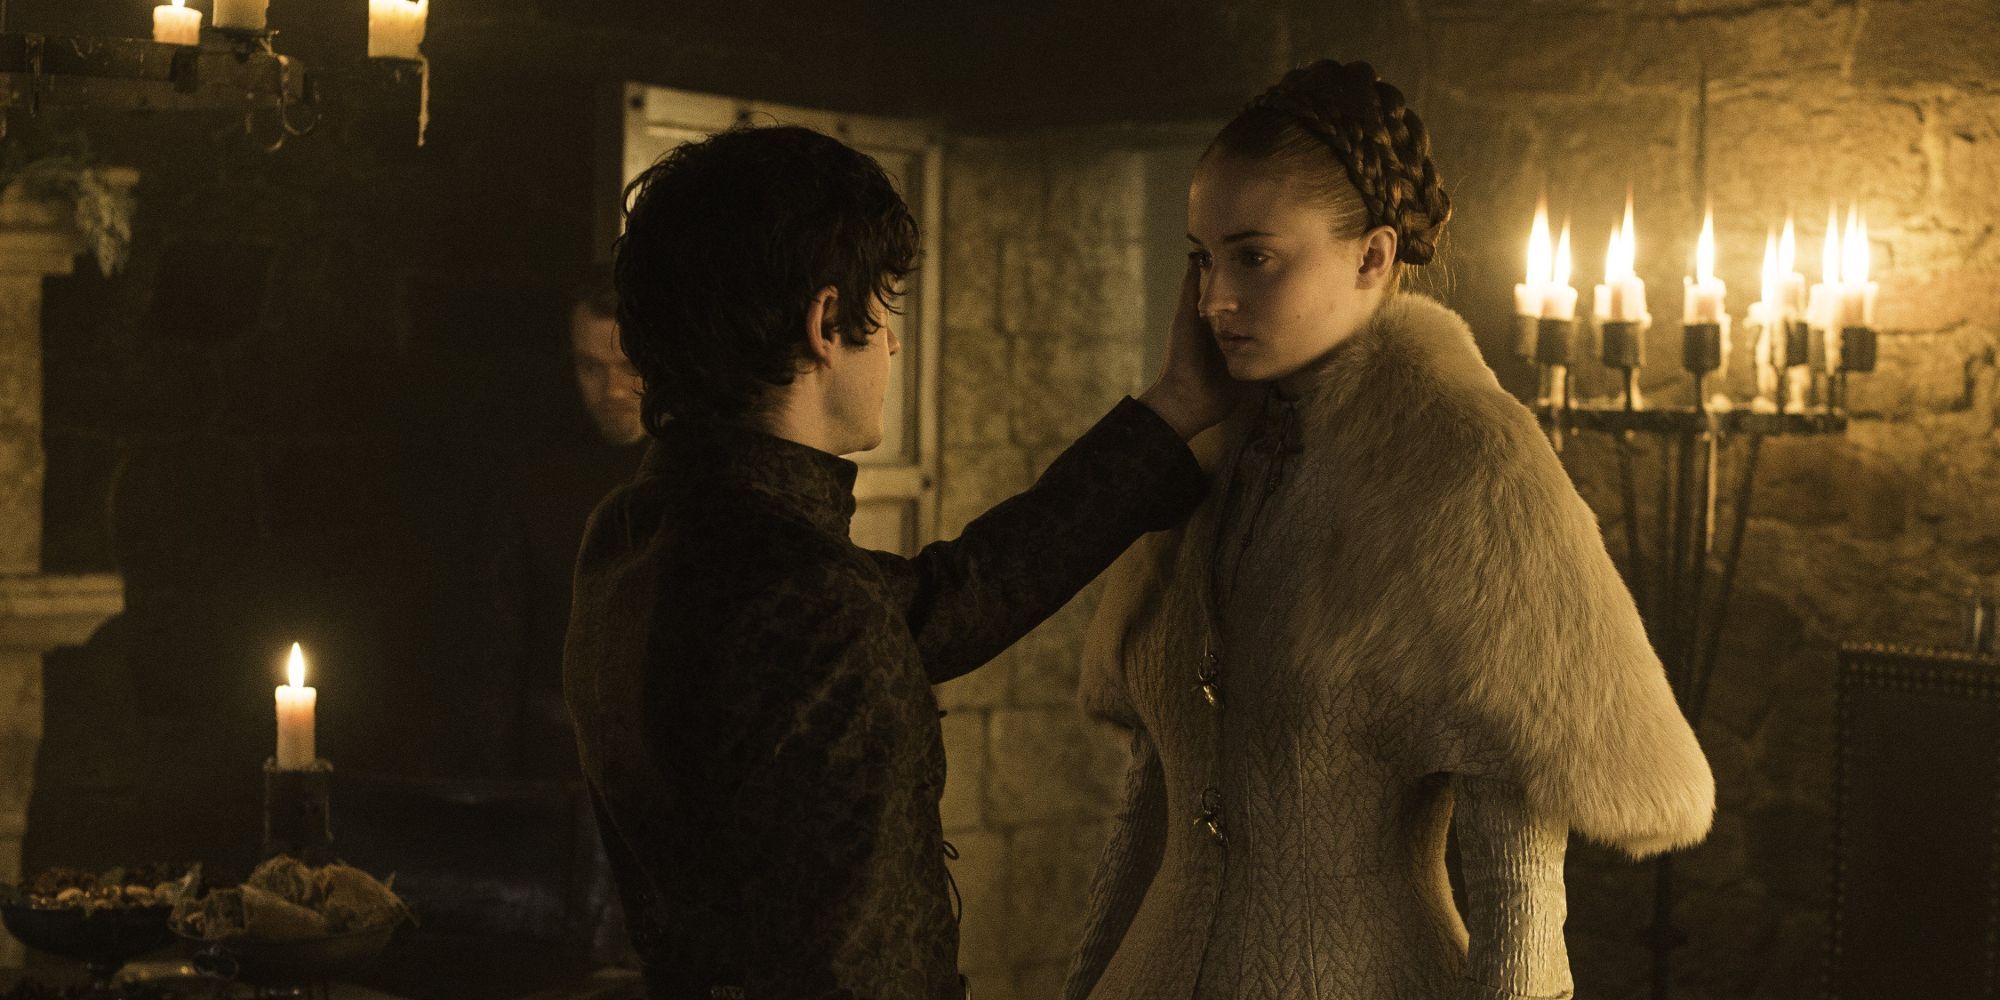 Game Of Thrones 10 Scenes That Make Viewers Nervous When Rewatching Lady Sansa Being Raped By Ramsay Bolton